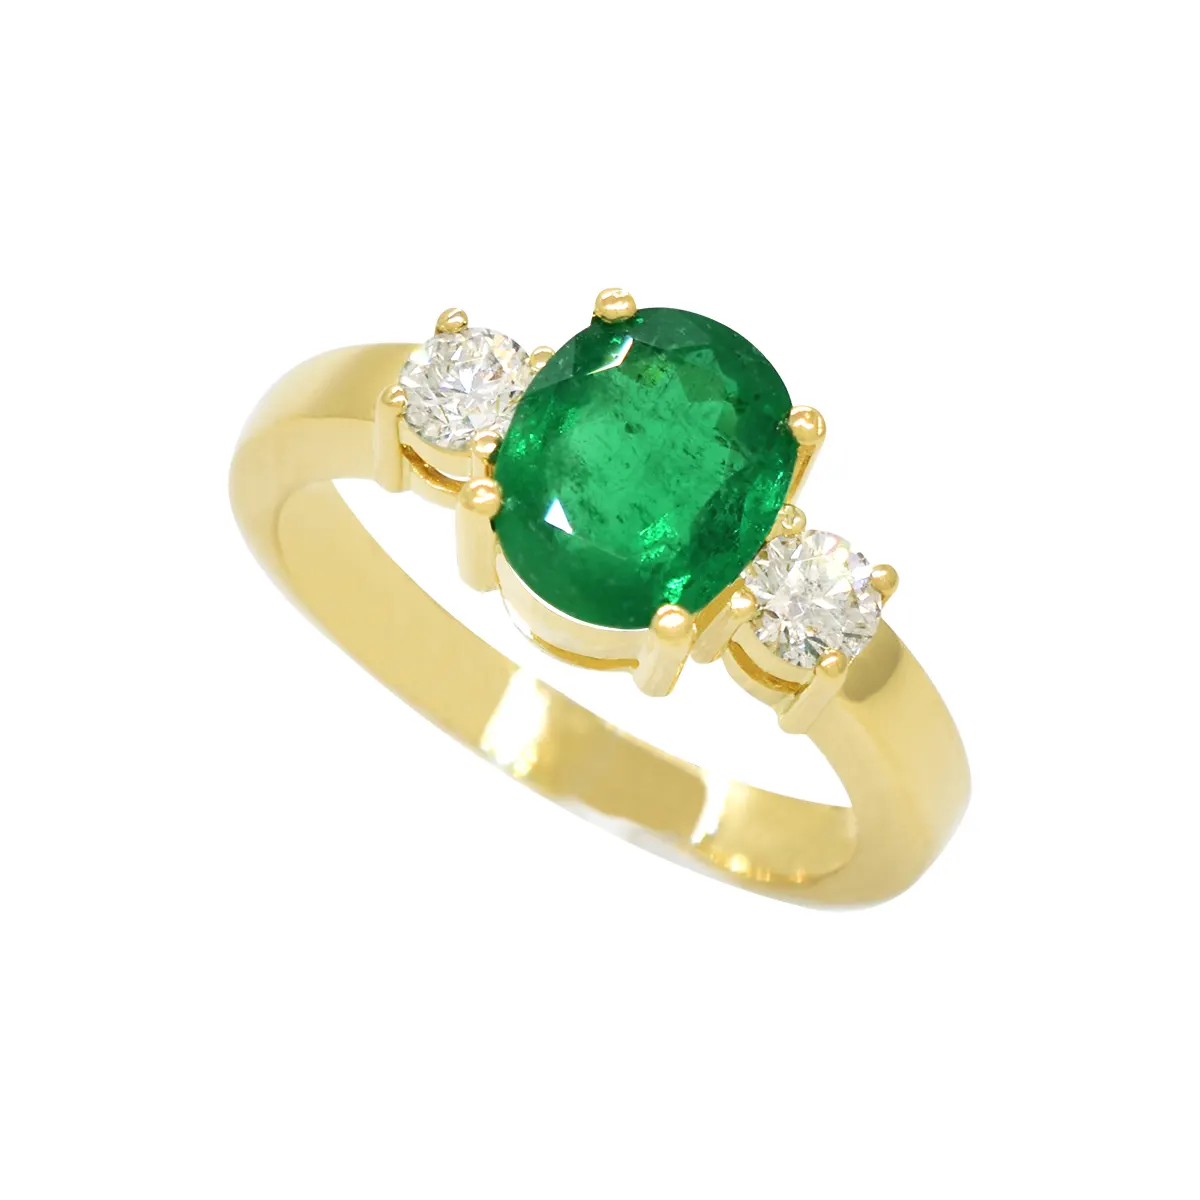 How to Clean an Emerald Ring at Home